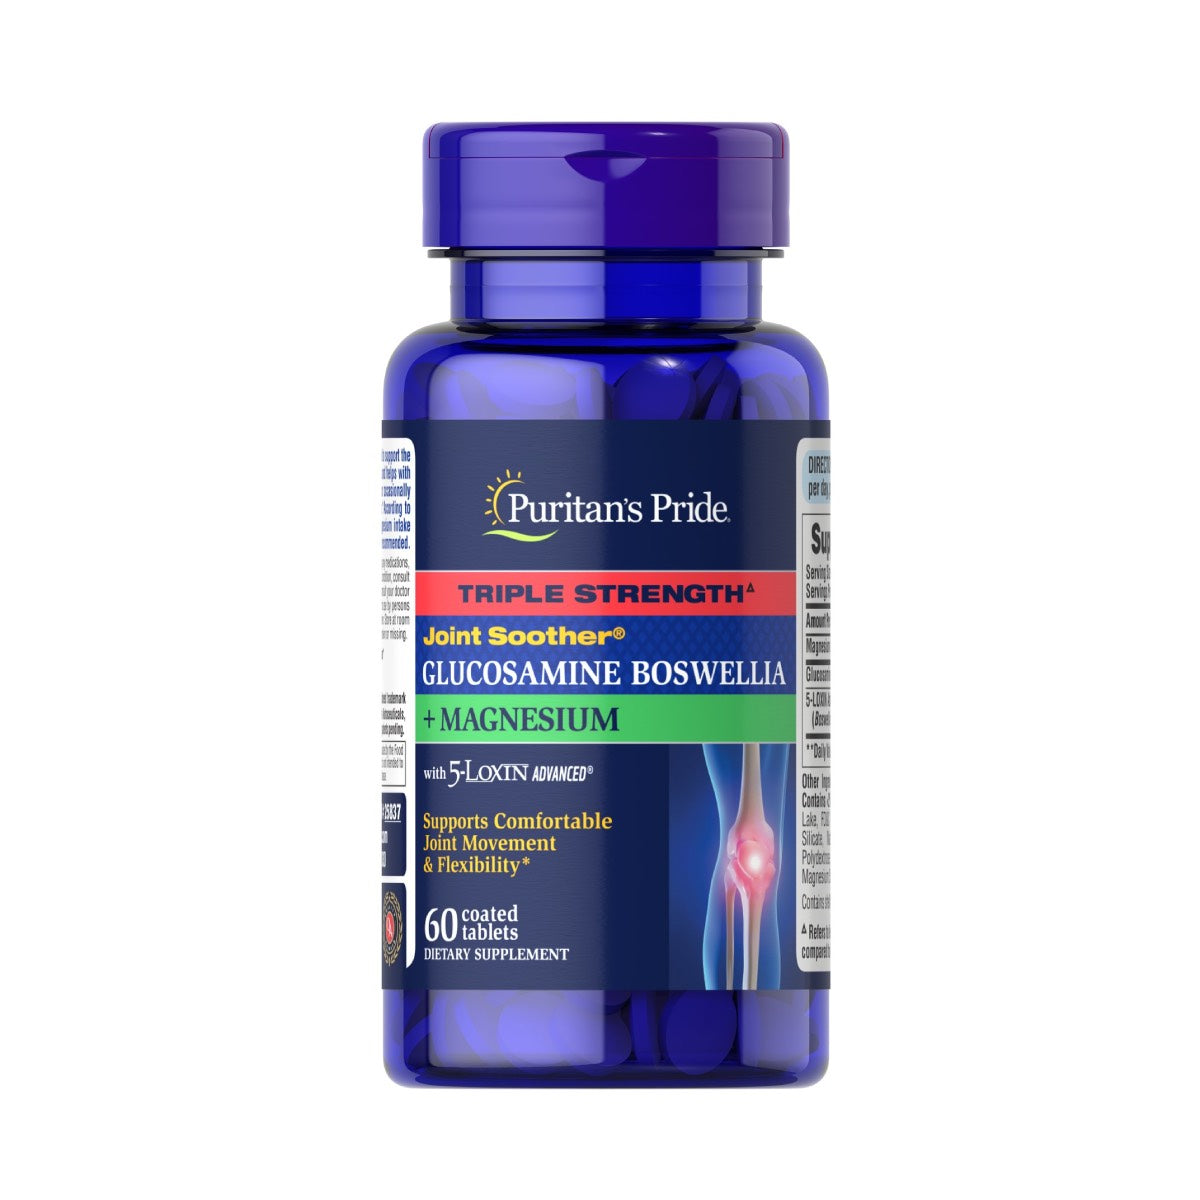 Puritan's Pride, Triple Strength Joint Soother ® Glucosamine Boswellia + Magnesium